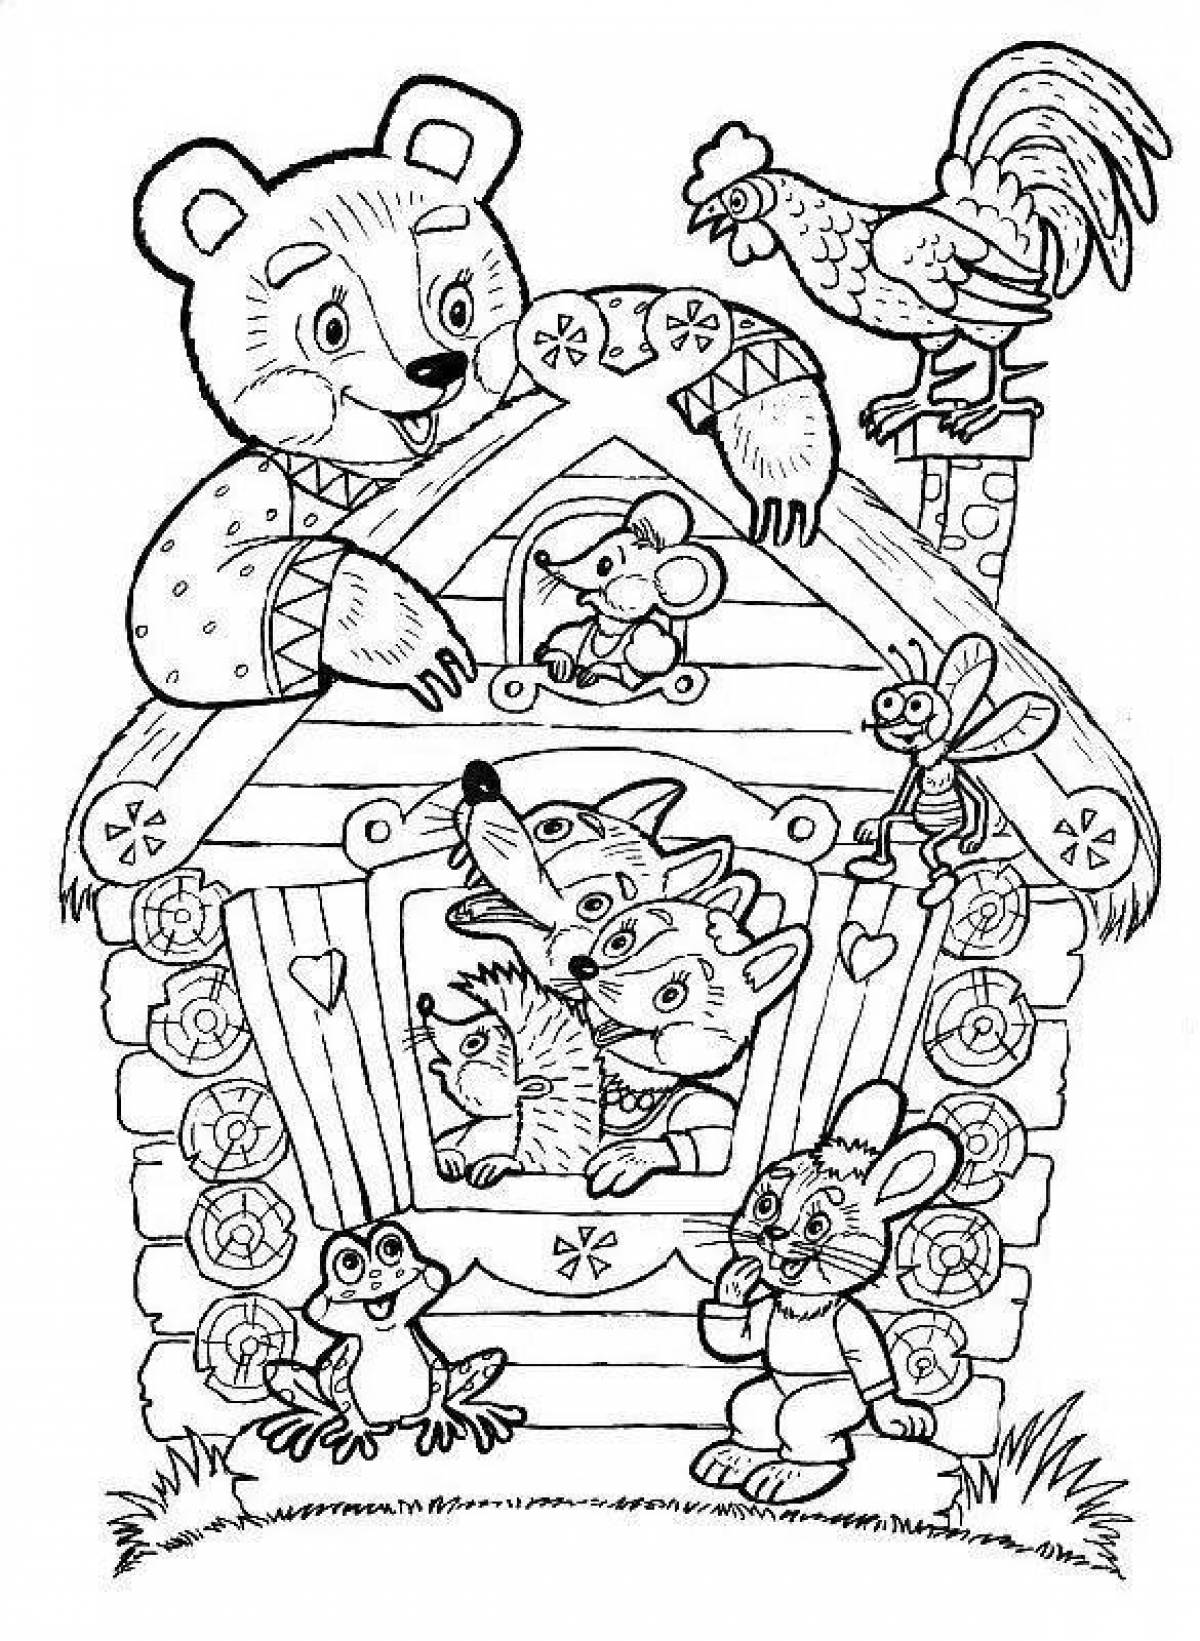 Great coloring book heroes of Russian fairy tales